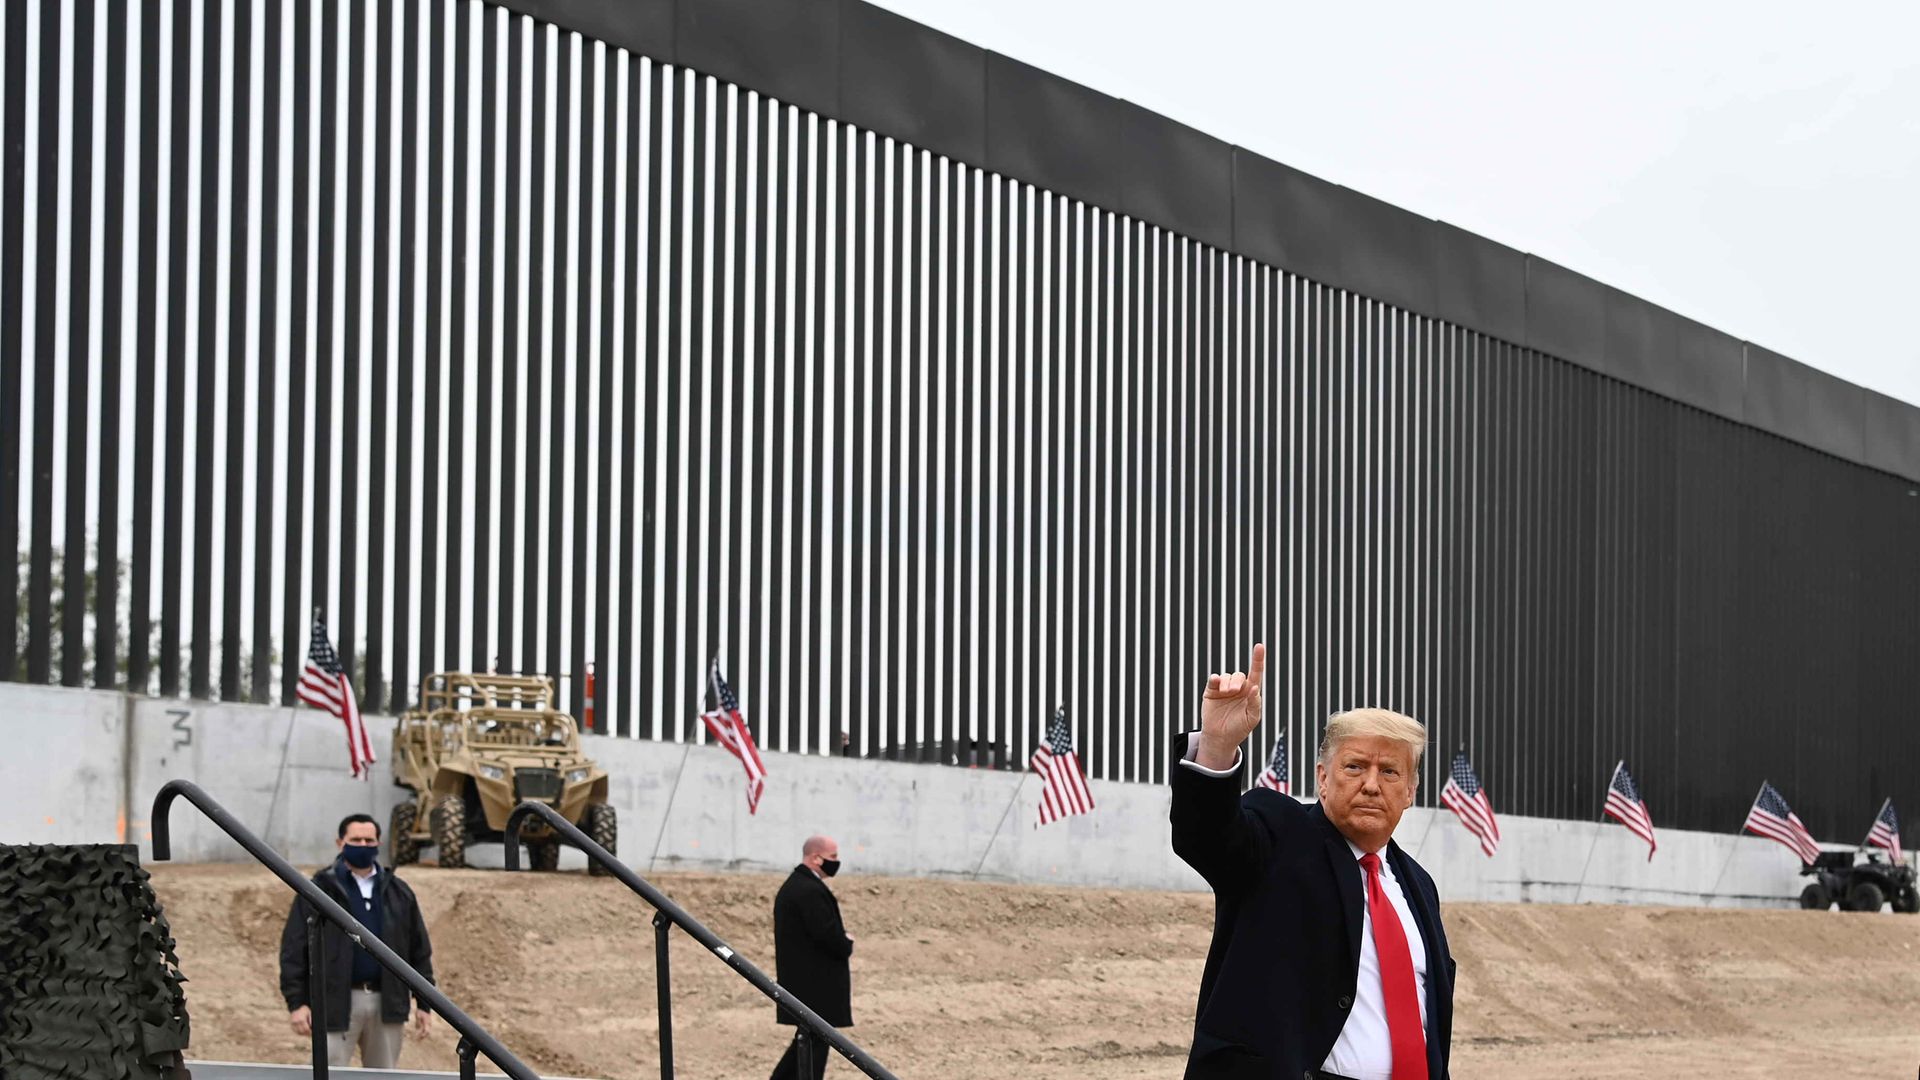 Donald Trump tours a section of the border wall in Alamo, Texas, in the final days of his presidency - Credit: AFP via Getty Images